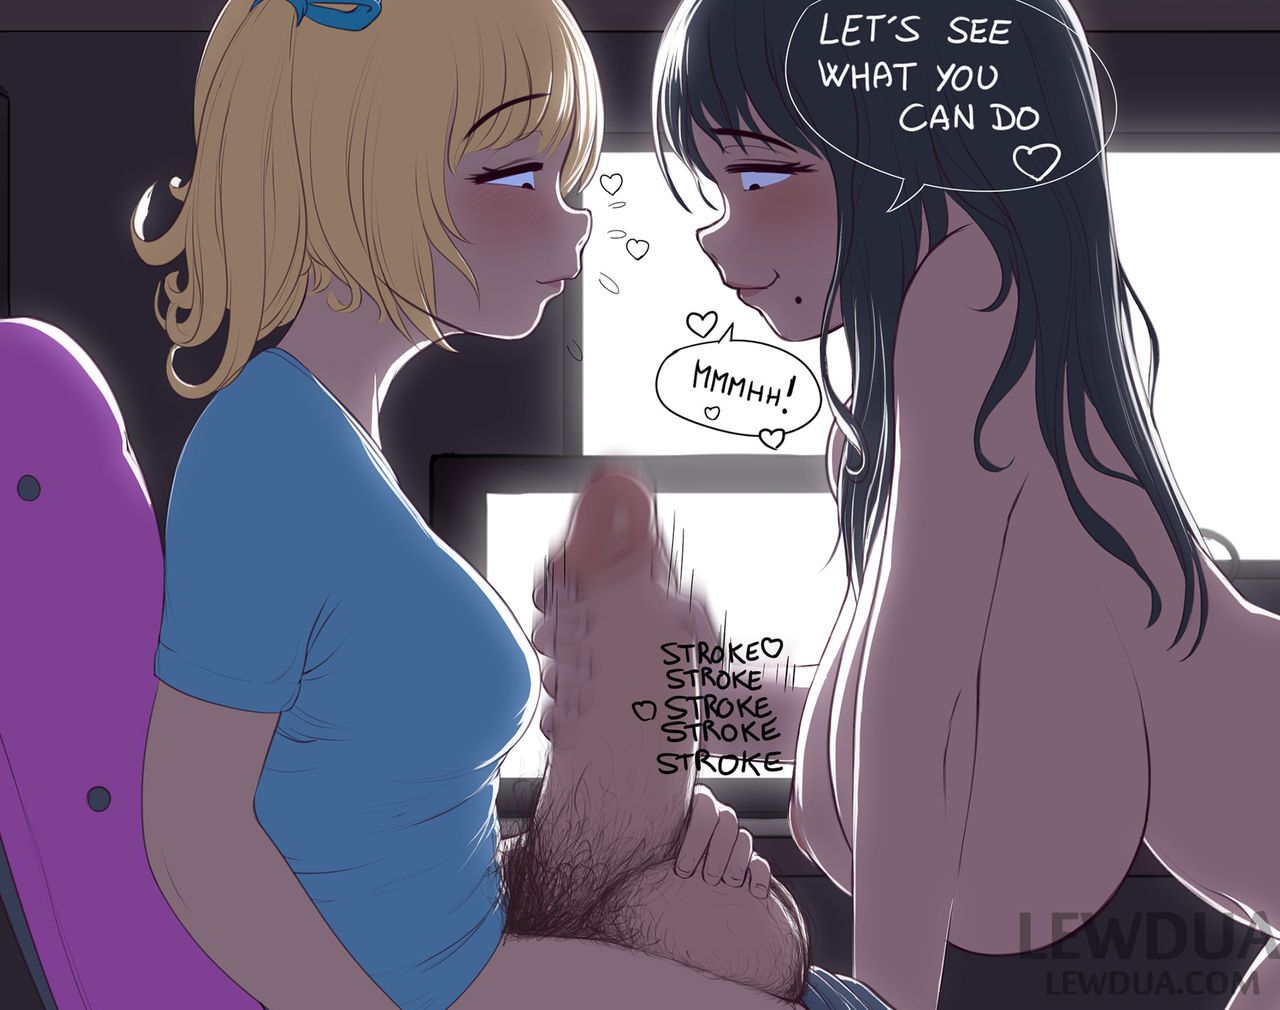 [Lewdua] Love is Sharing - Nessie and Alison 38